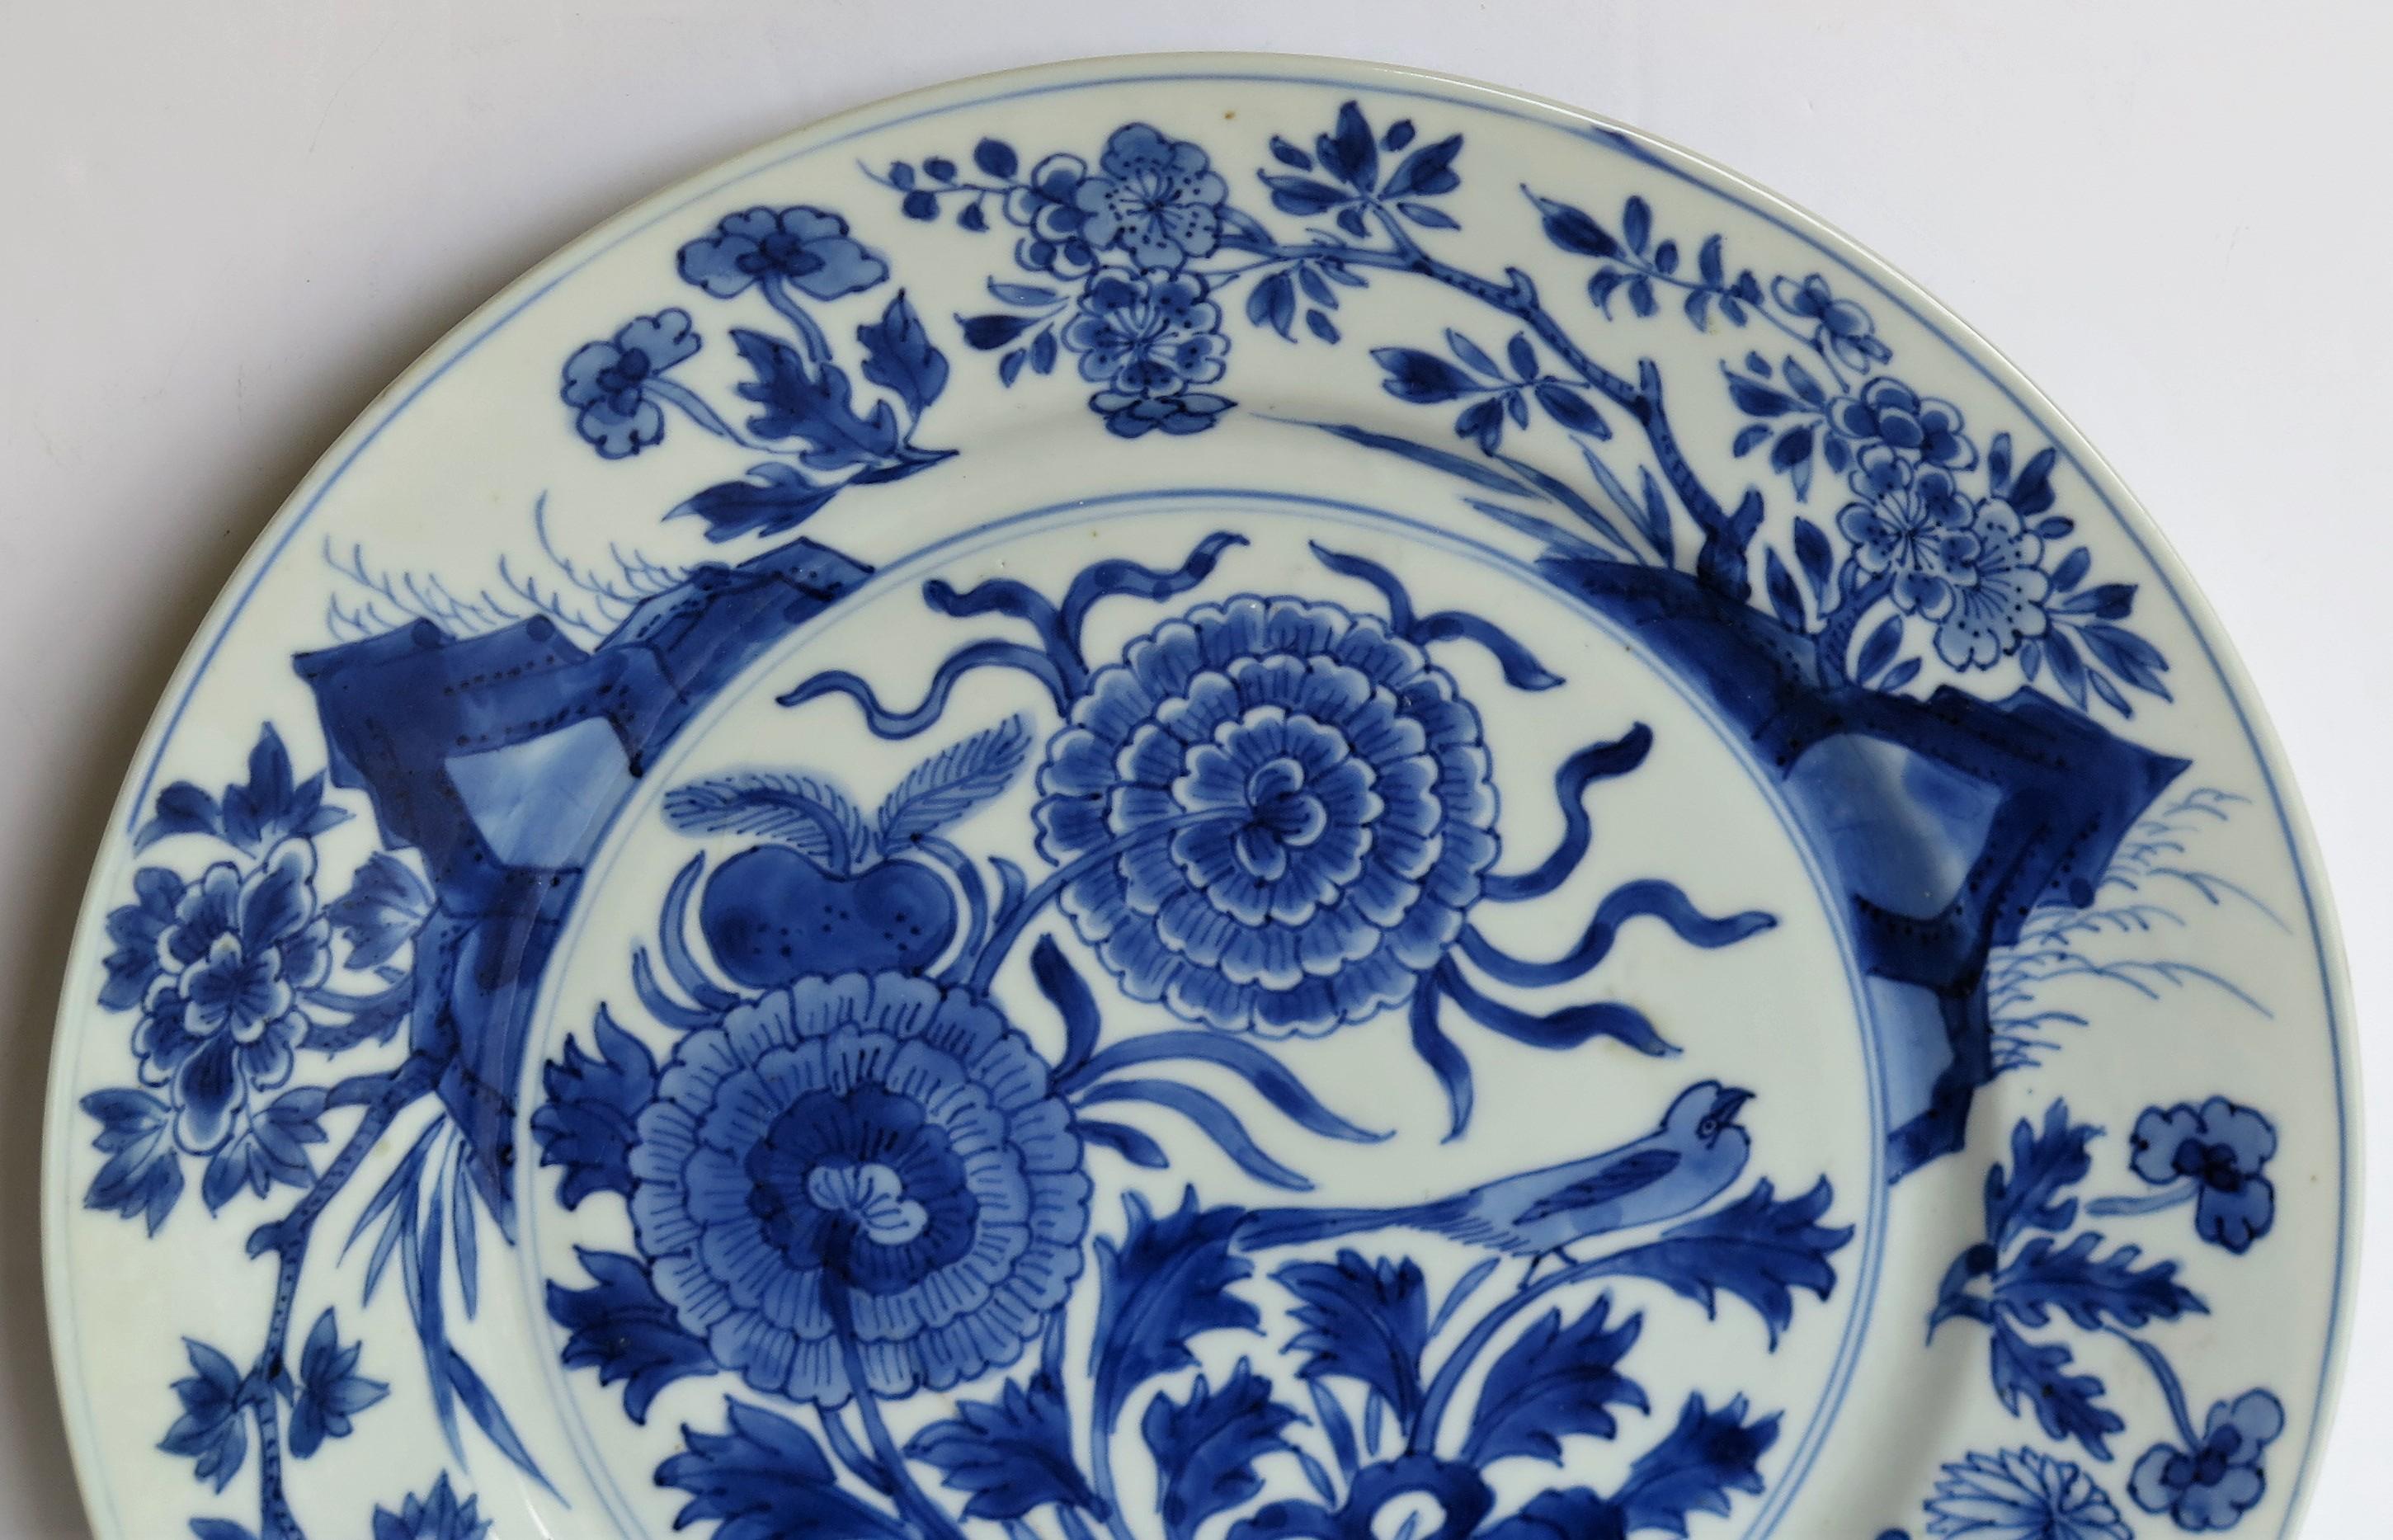 Hand-Painted Fine Chinese Porcelain Blue and White Plate, Kangxi Period & Mark, circa 1700